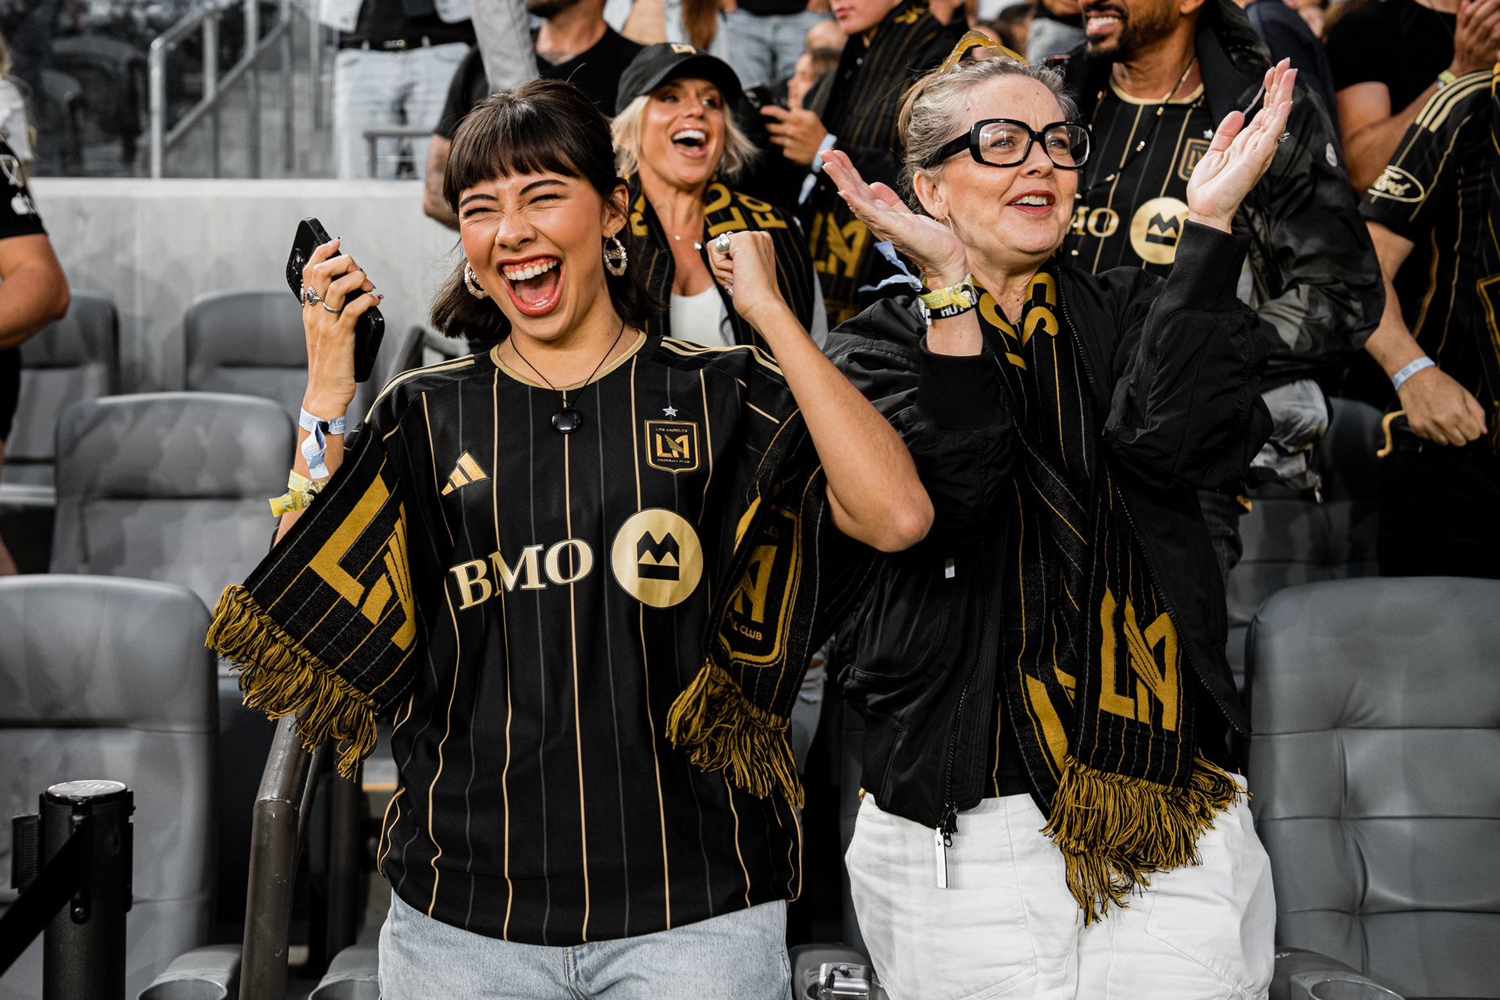 Xochitl Gomez and her mom cheered on the LAFC to a 3-0 victory on Saturday night at BMO Stadium. Xochitl enjoyed the game and took photos with her fans. 